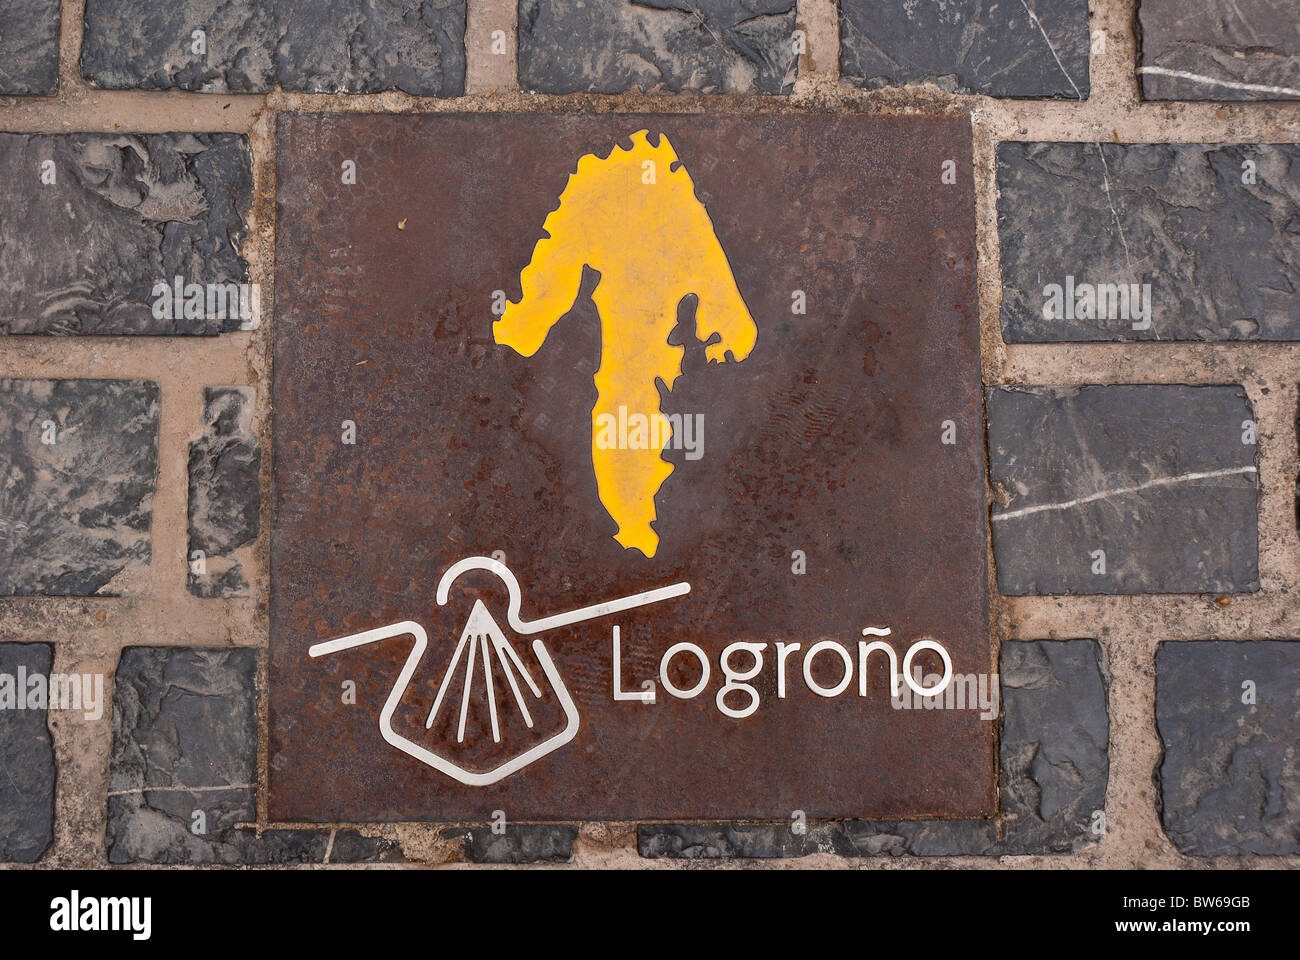 St Way of st James logo in the city of Logrono Stock Photo